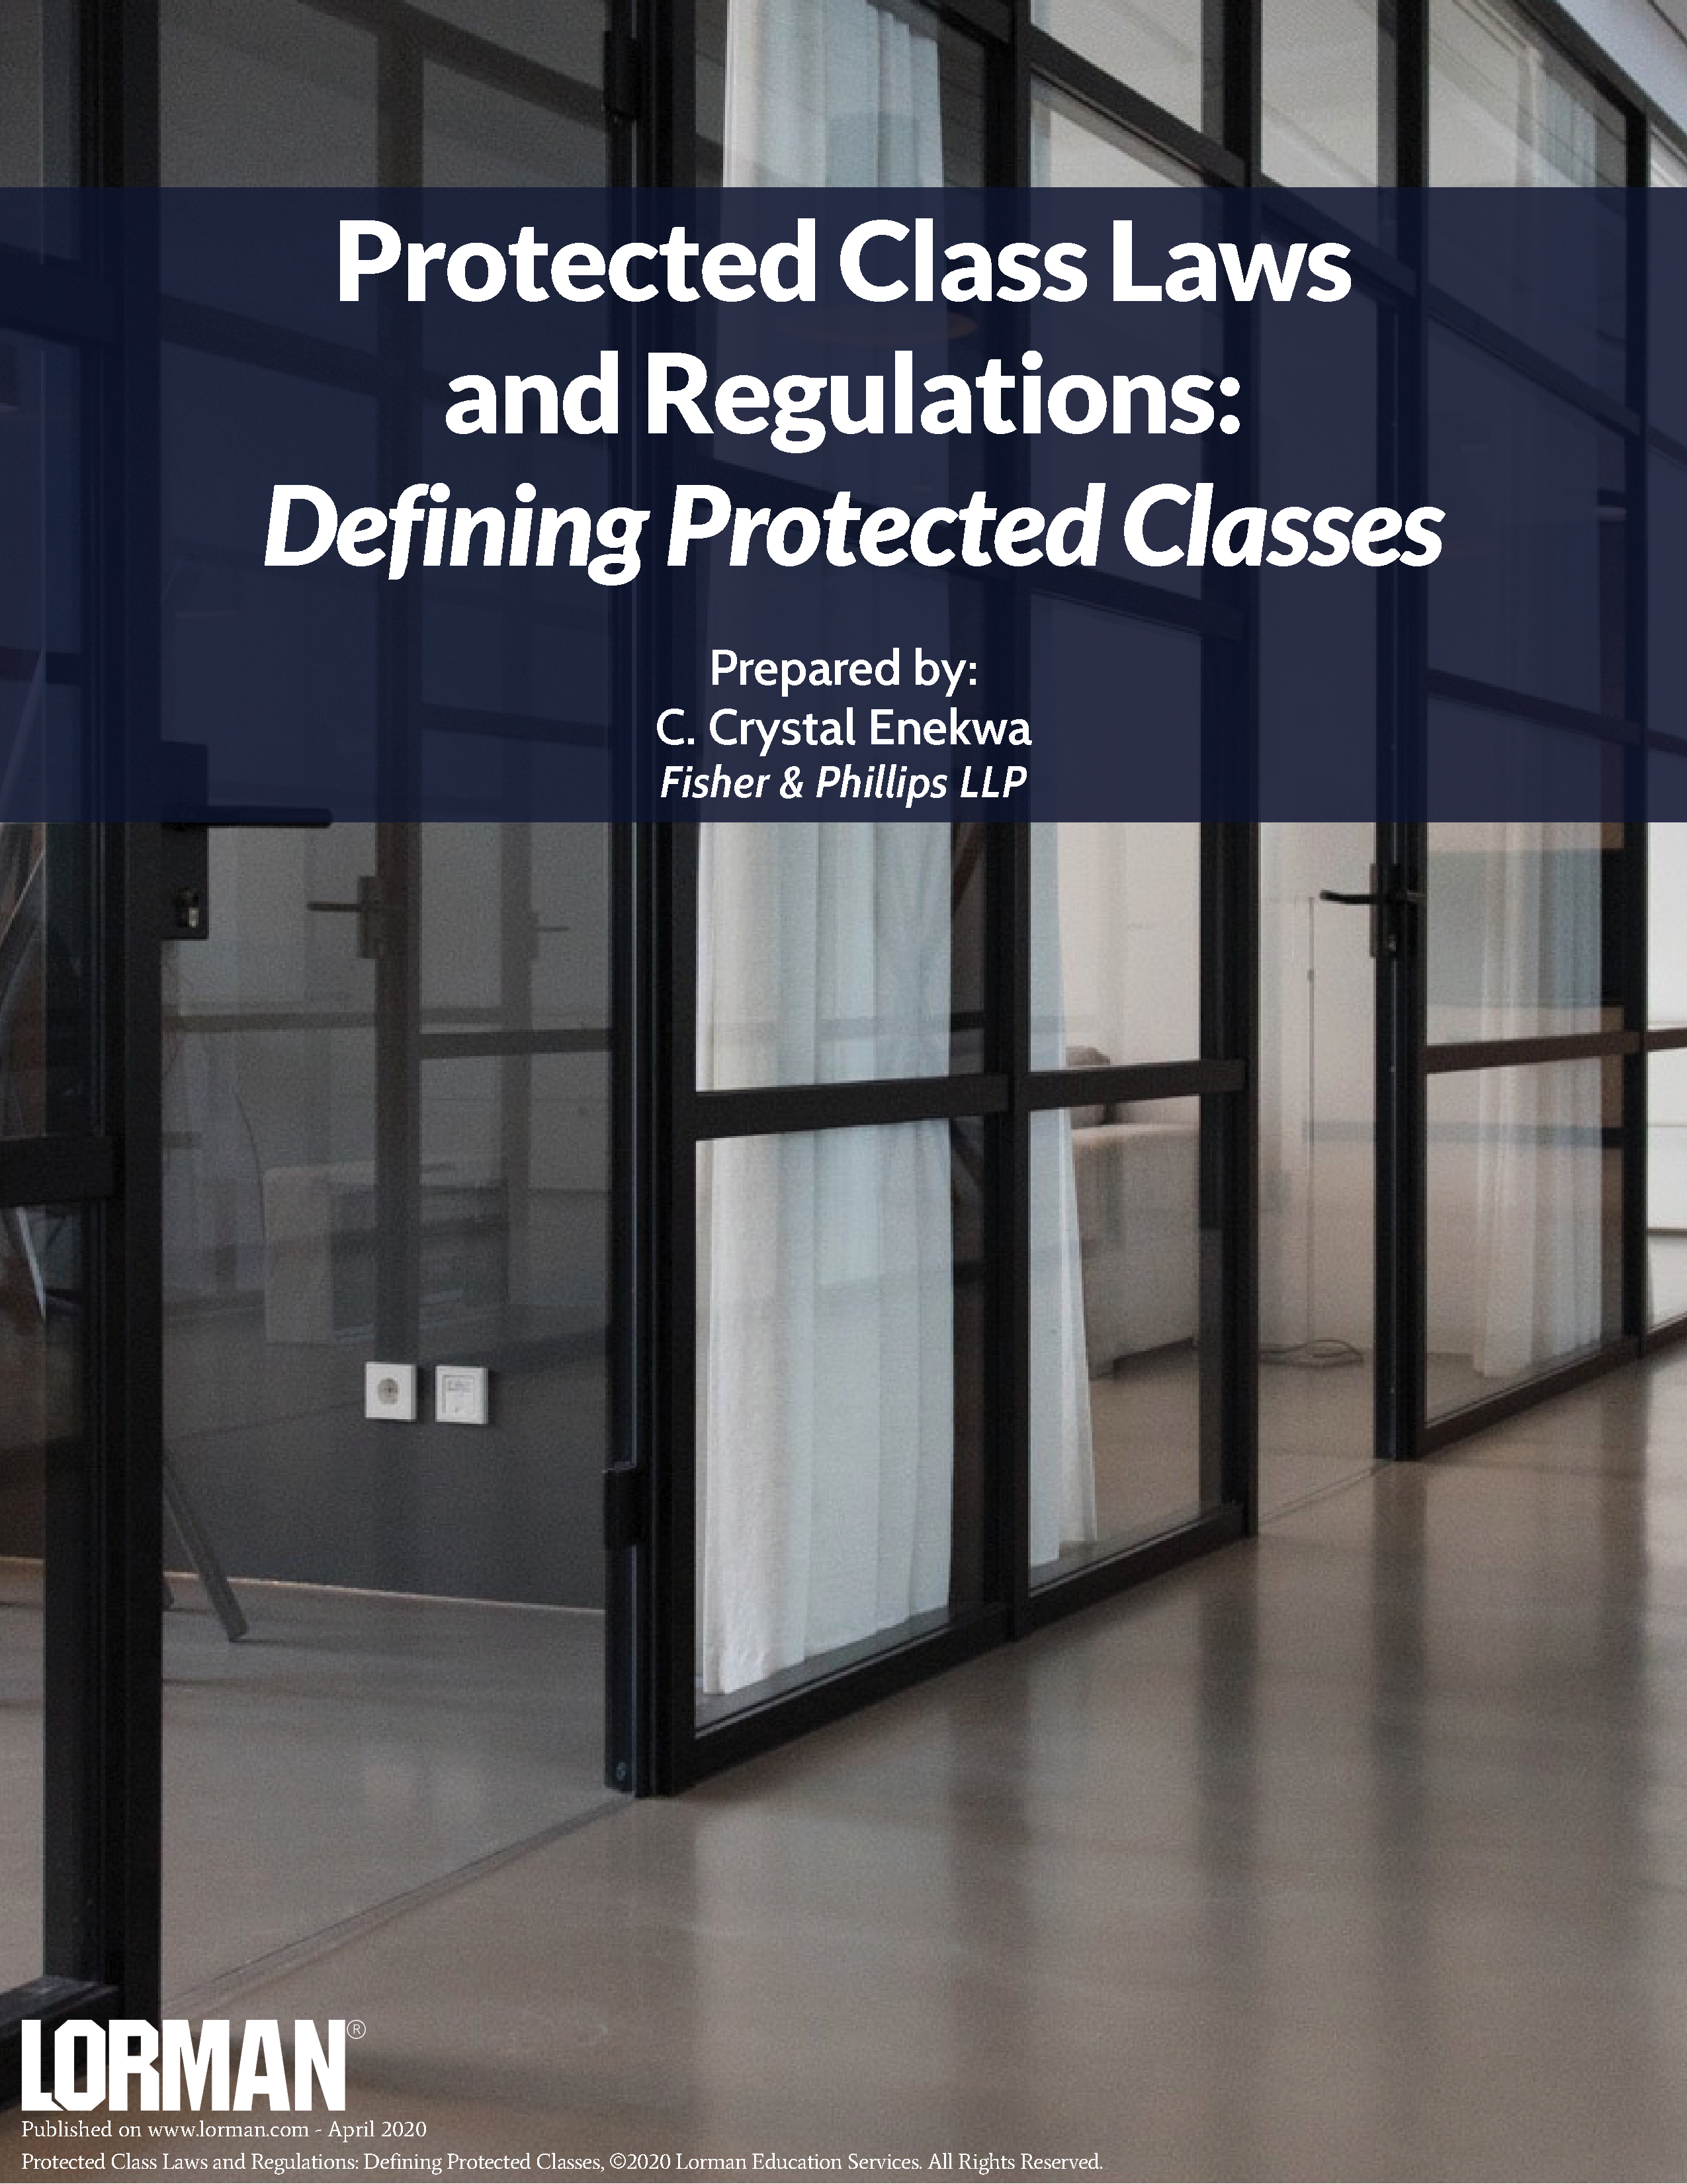 Protected Class Laws and Regulations: Defining Protected Classes